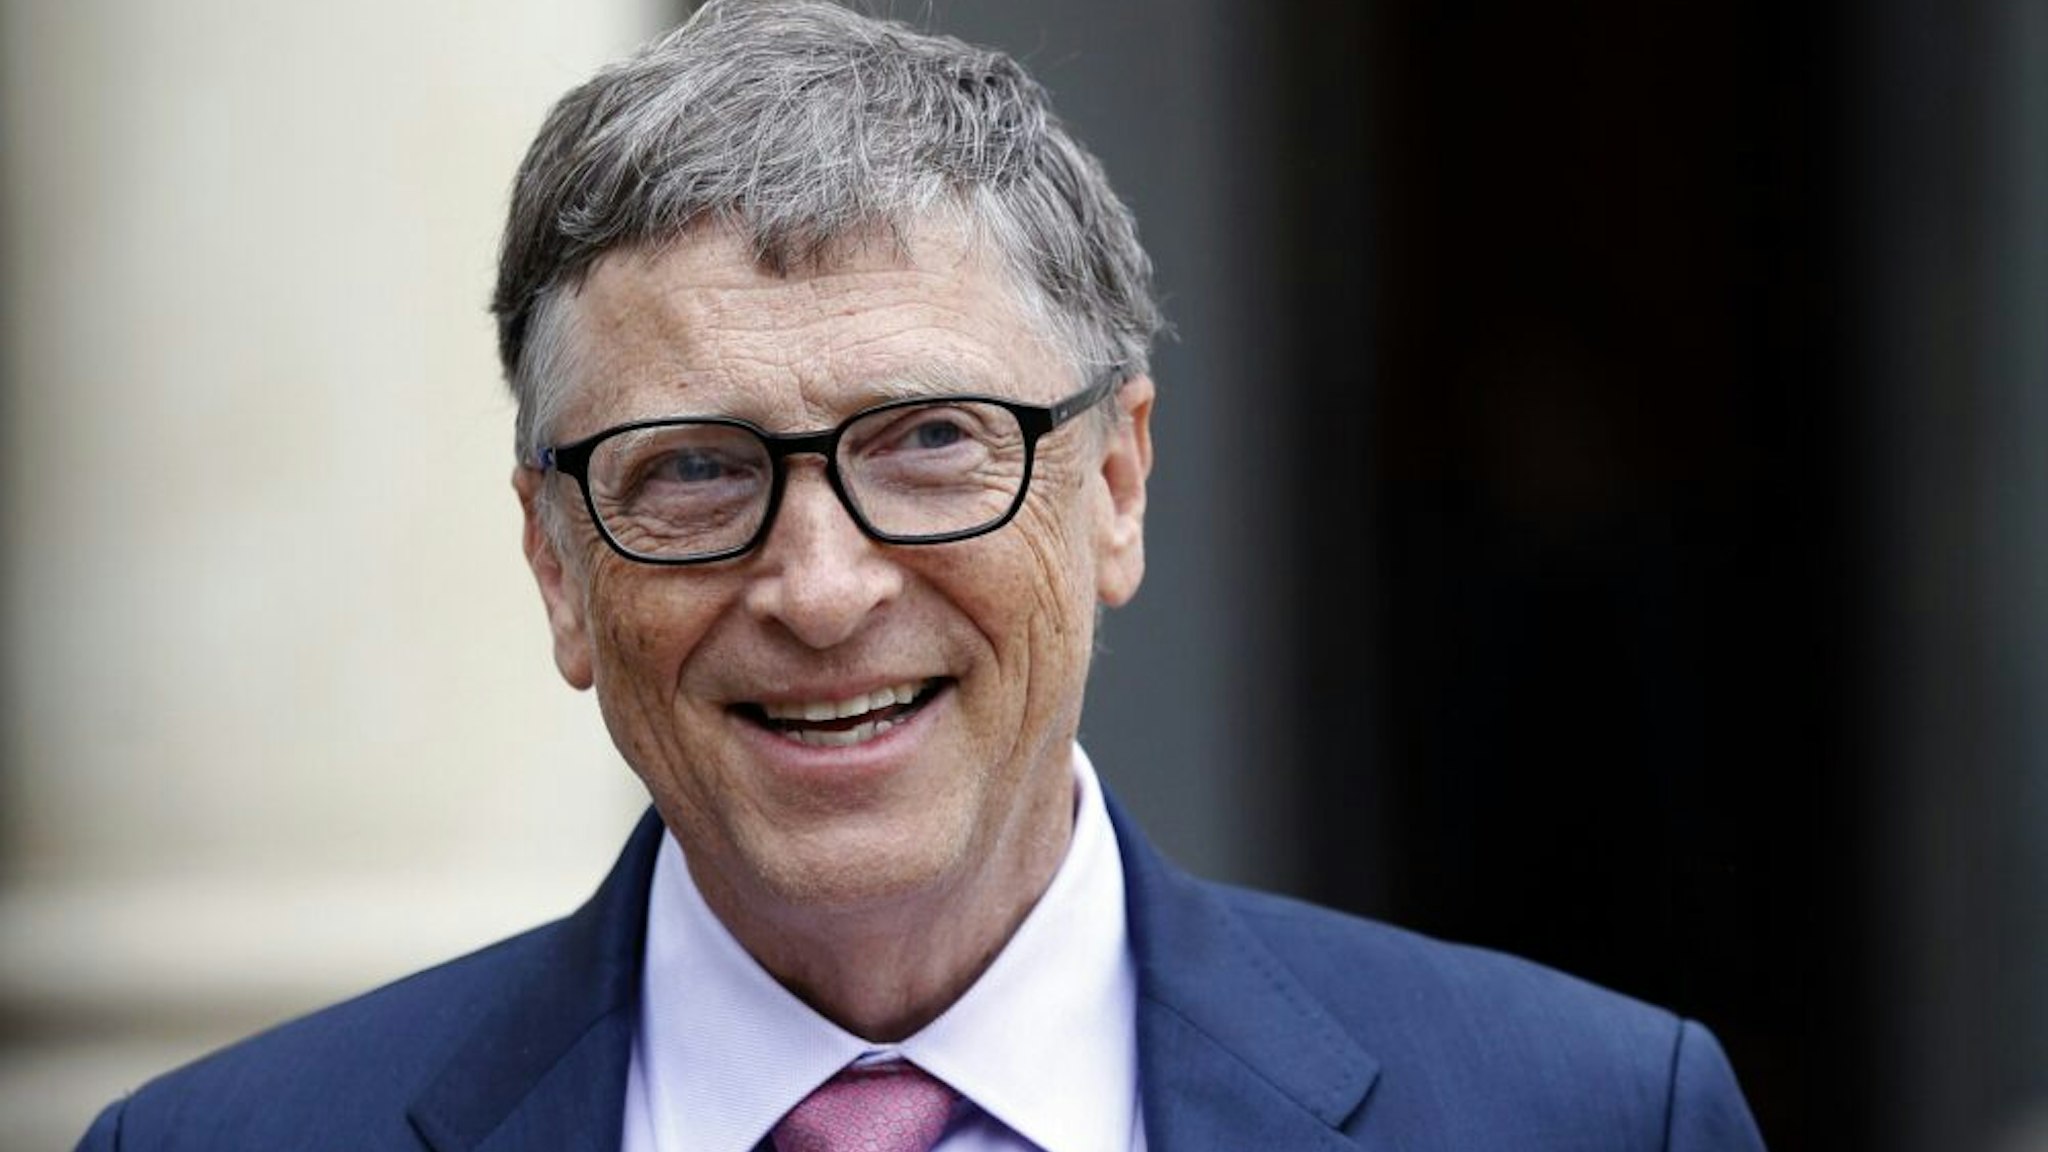 PARIS, FRANCE - JUNE 27: Bill Gates, the co-Founder of the Microsoft company and co-Founder of the Bill and Melinda Gates Foundation makes a statement after his meeting with French President Francois Hollande at the Elysee Presidential Palace on June 27, 2016 in Paris, France. Bill Gates mentioned in a short statement after his meeting with French President Francois Hollande that France was a great asset in the fight against AIDS.